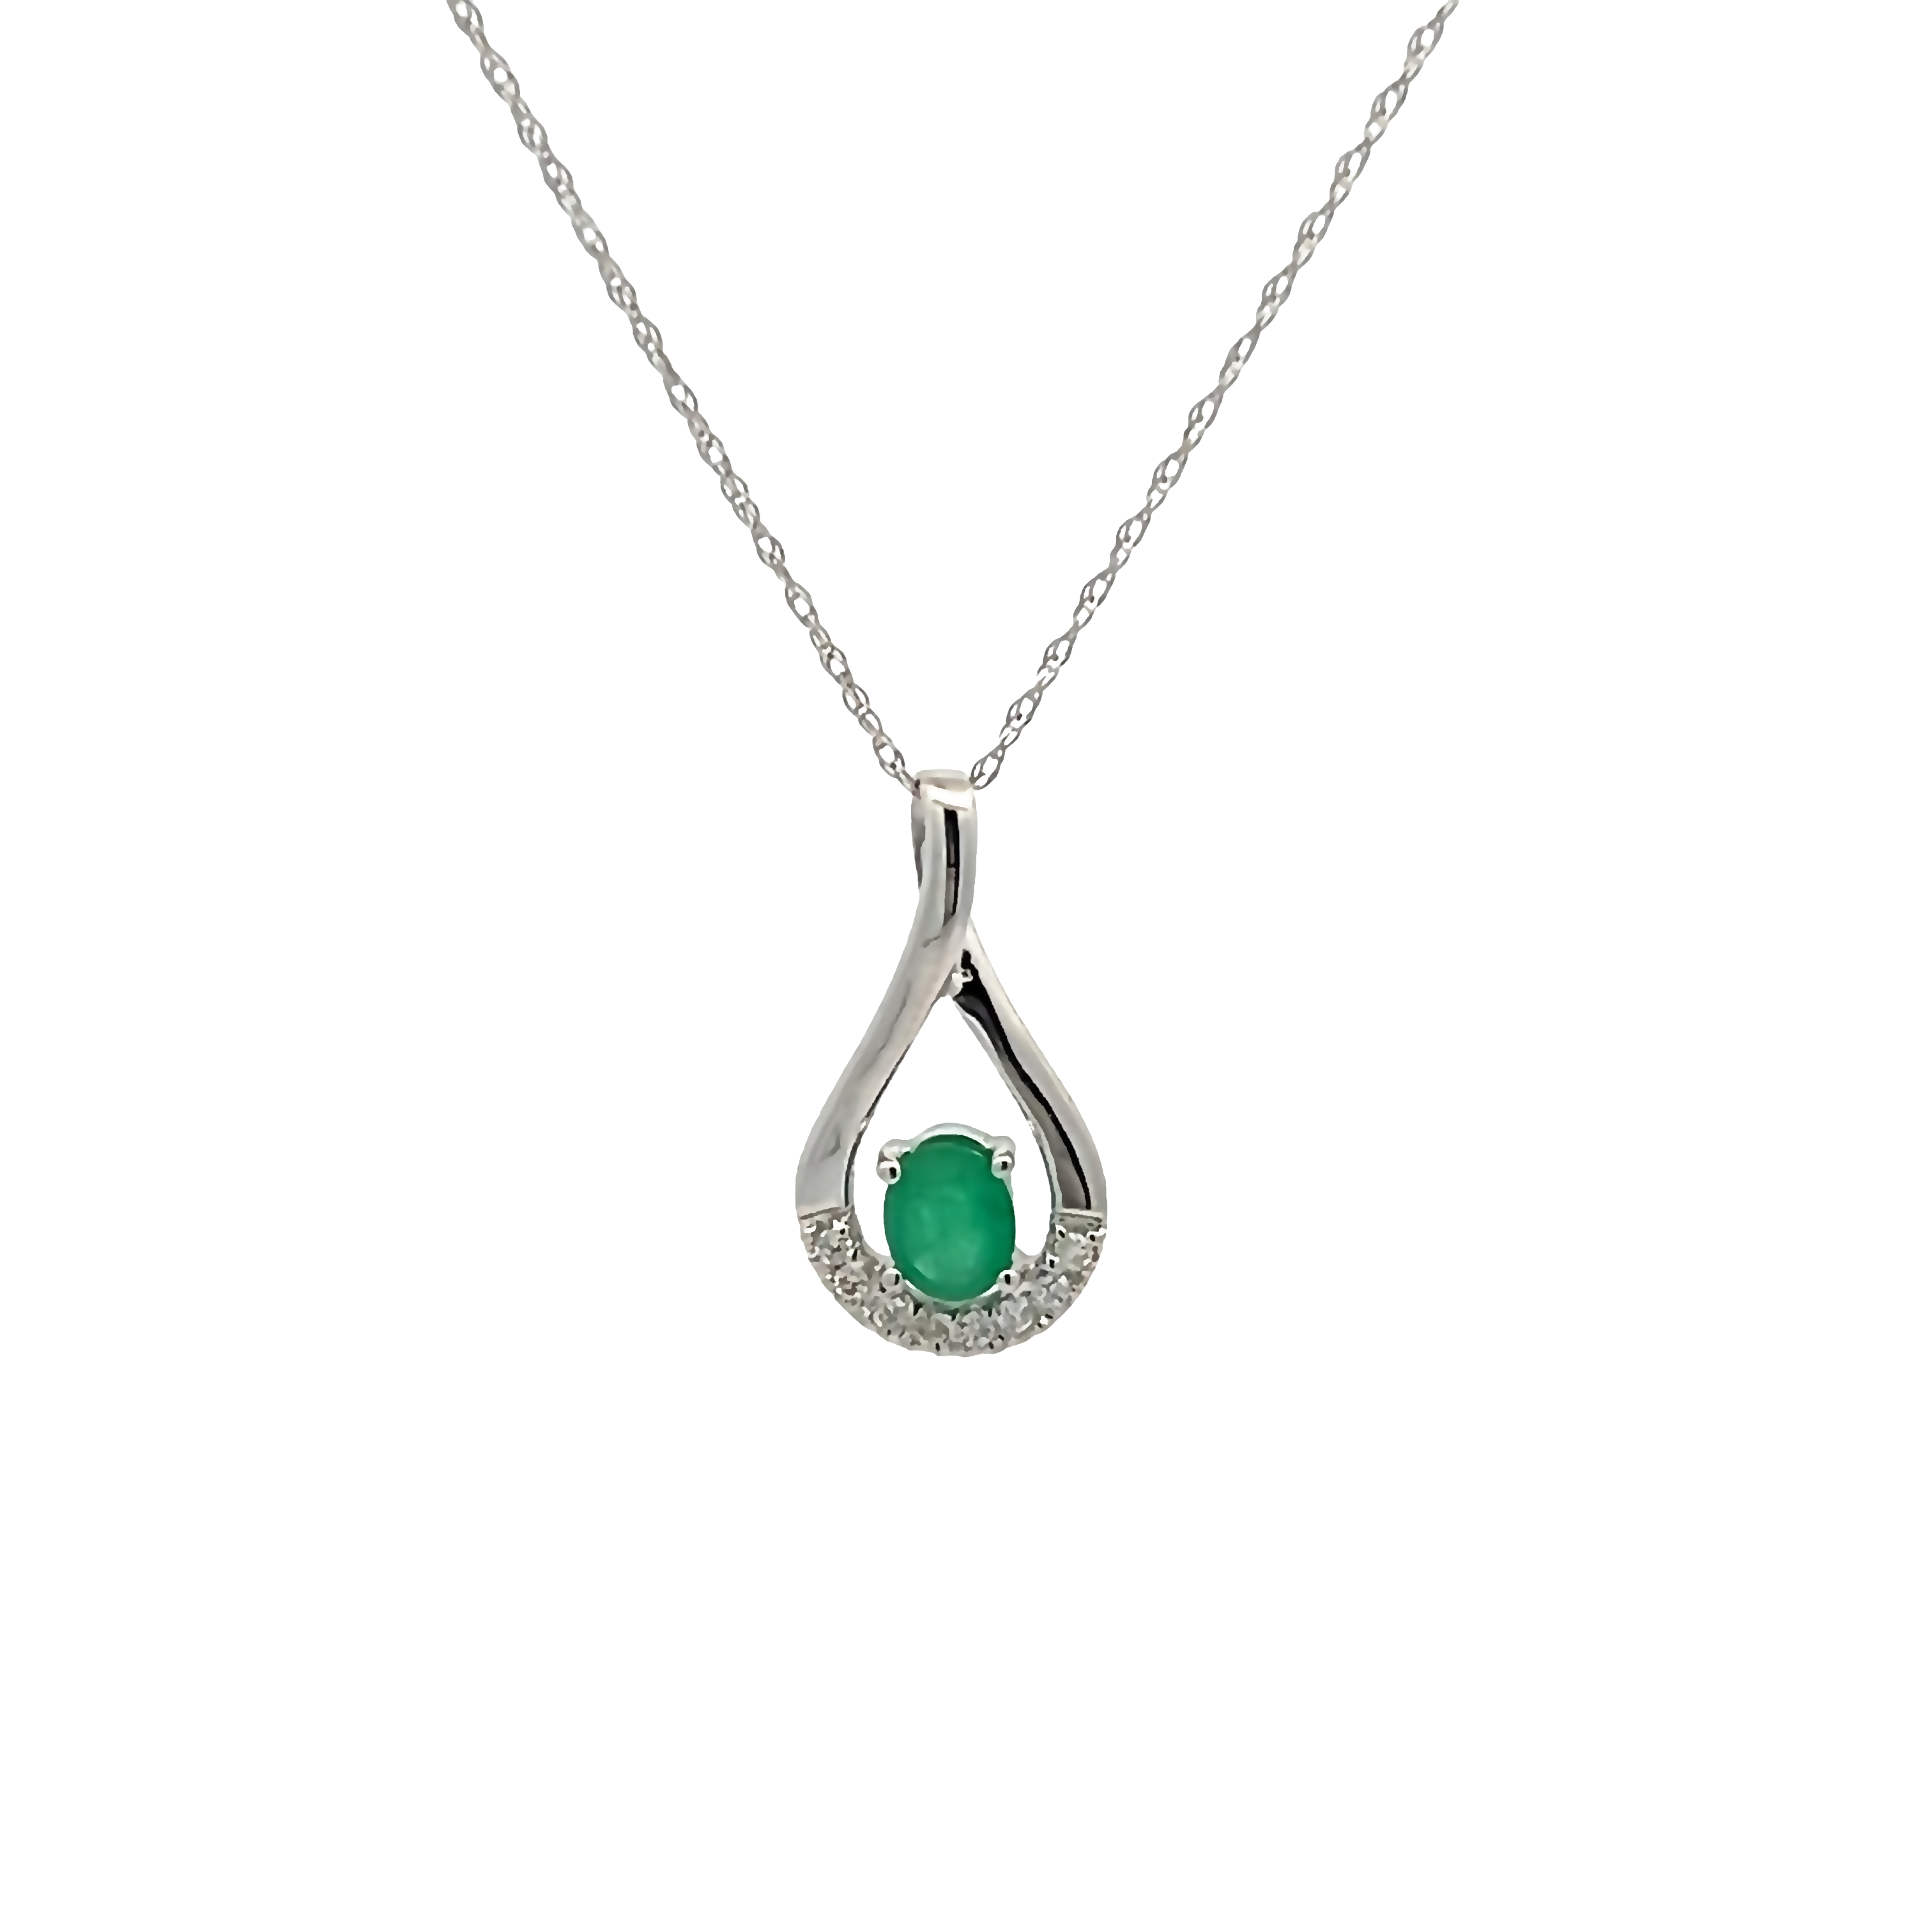 14k White Gold Free Form Emerald Pendant Necklace